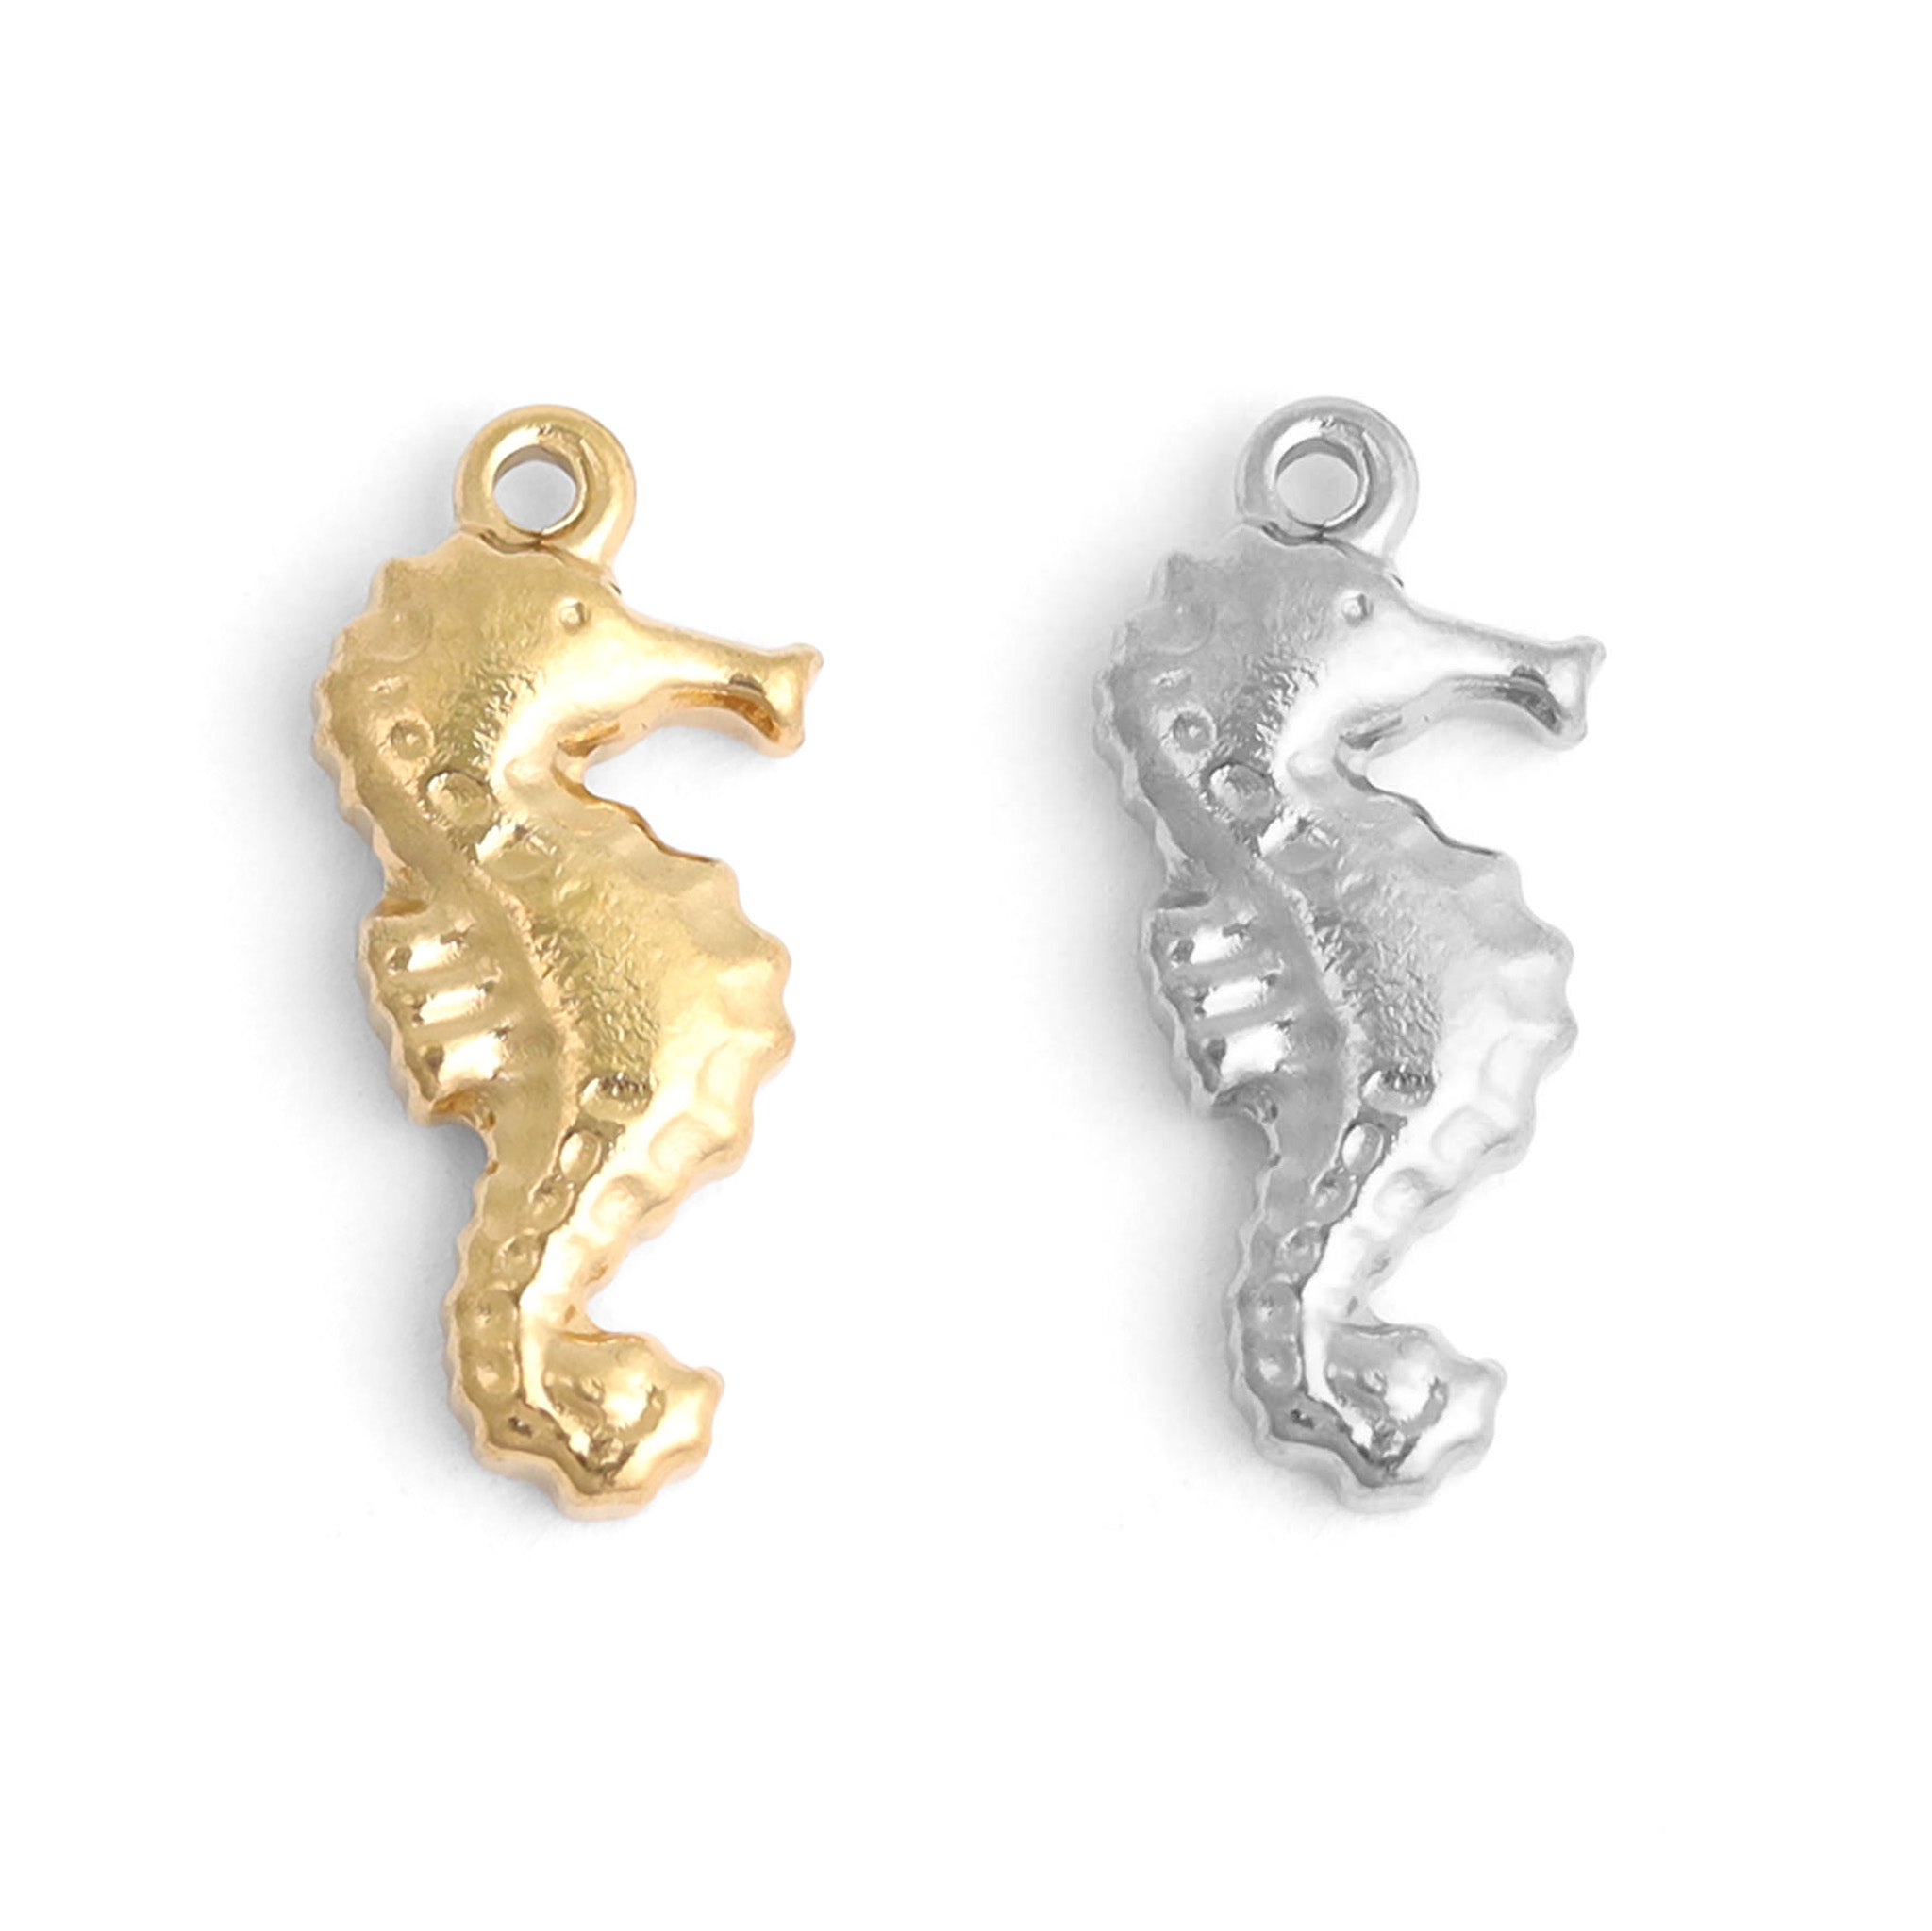 18K Gold PVD Stainless Steel Seahorse Charm / PDL0096